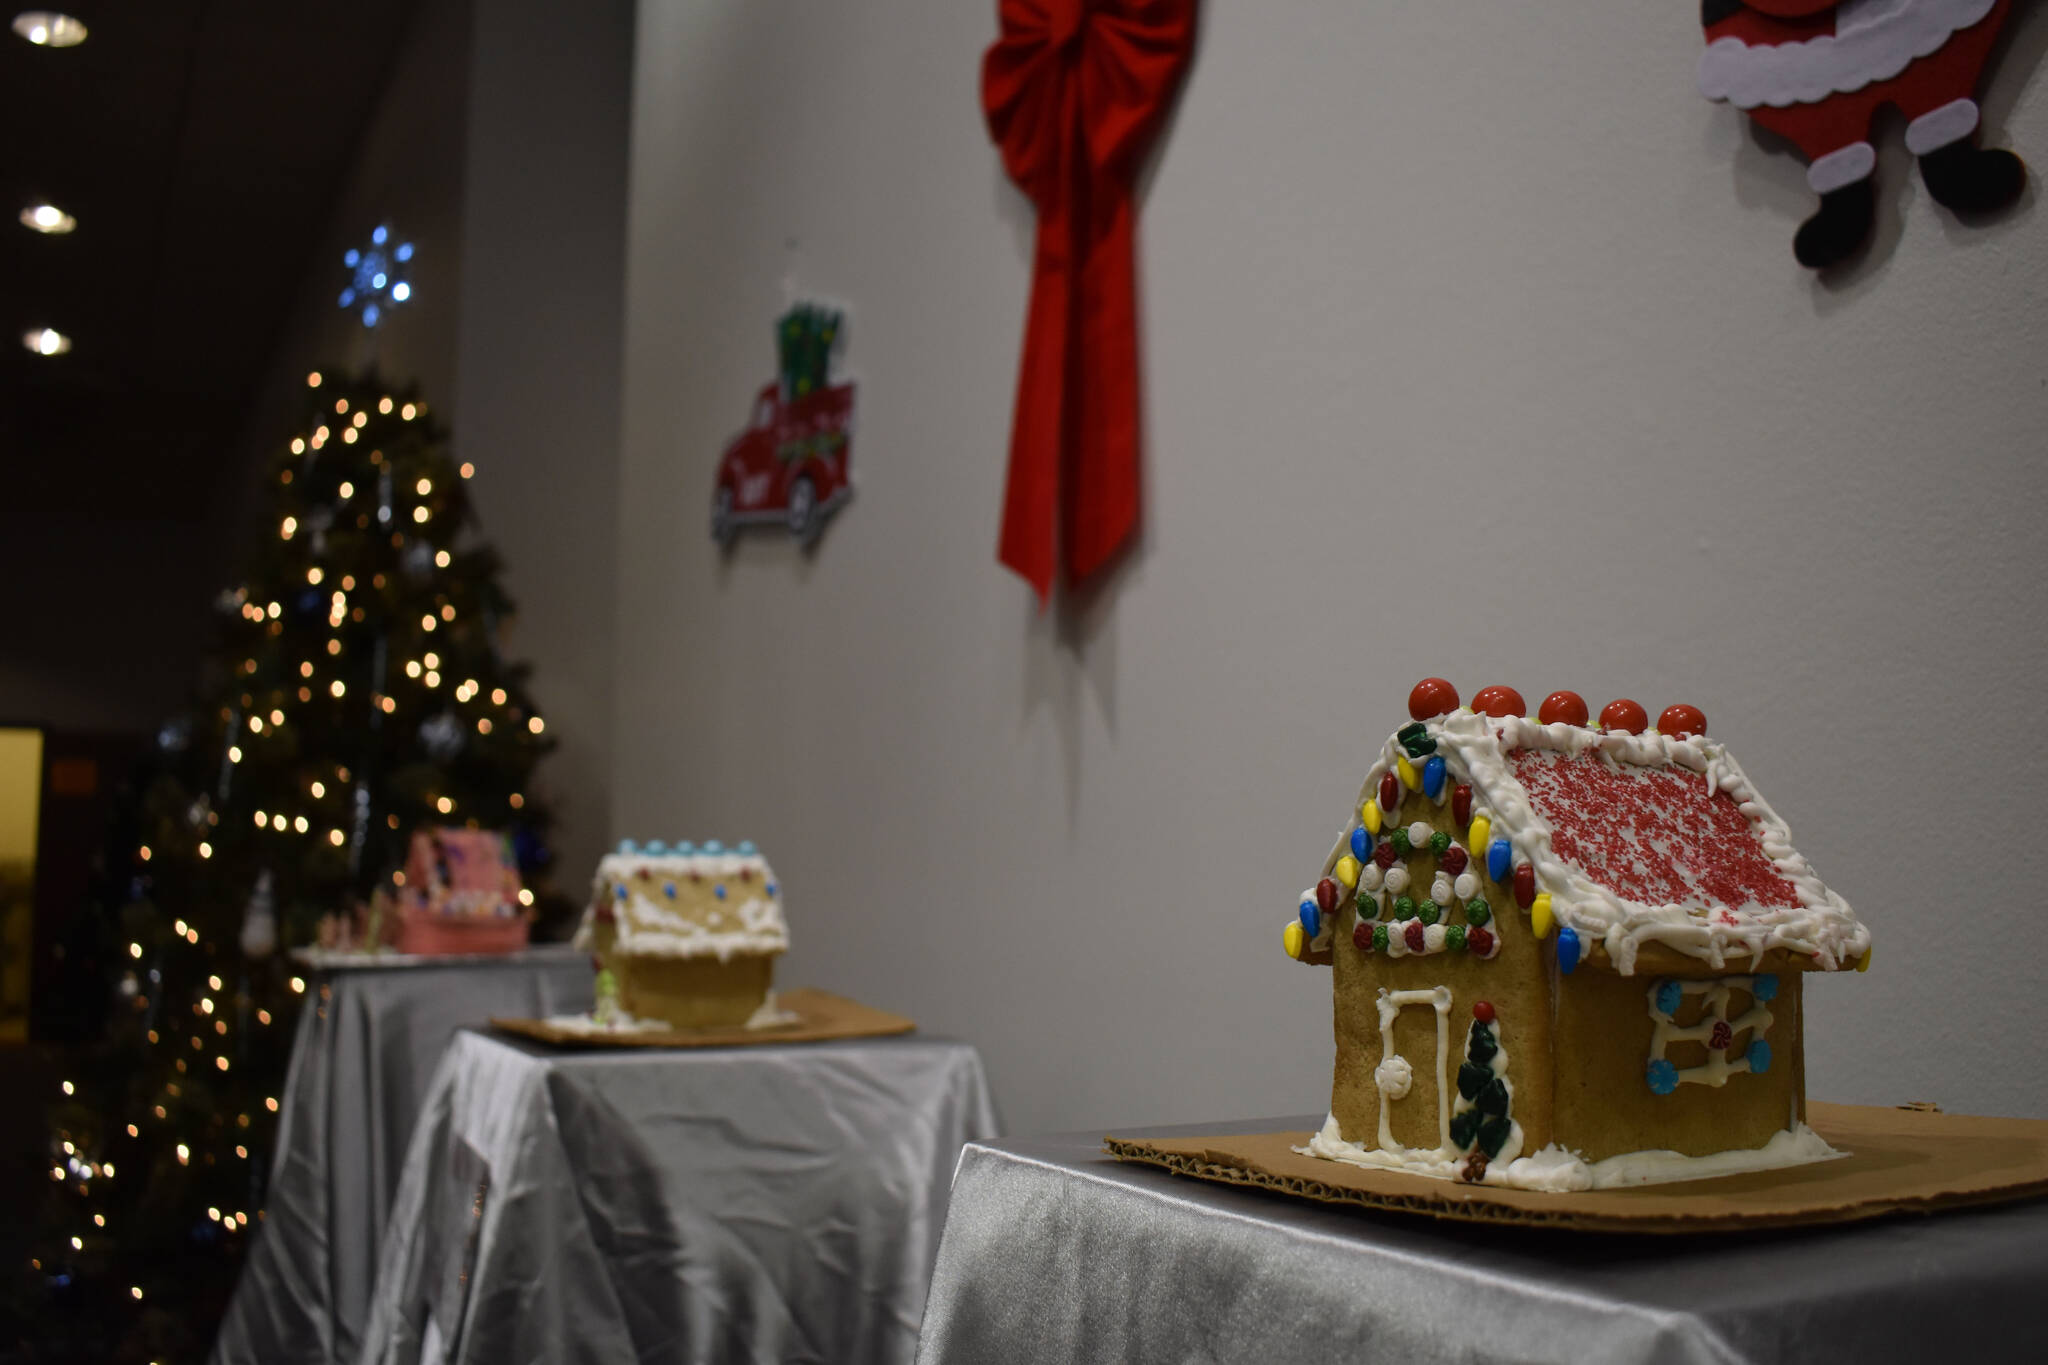 Gingerbread houses are displayed at the Kenai Chamber of Commerce and Visitor Center on Tuesday, Dec. 6, 2022. (Jake Dye/Peninsula Clarion)